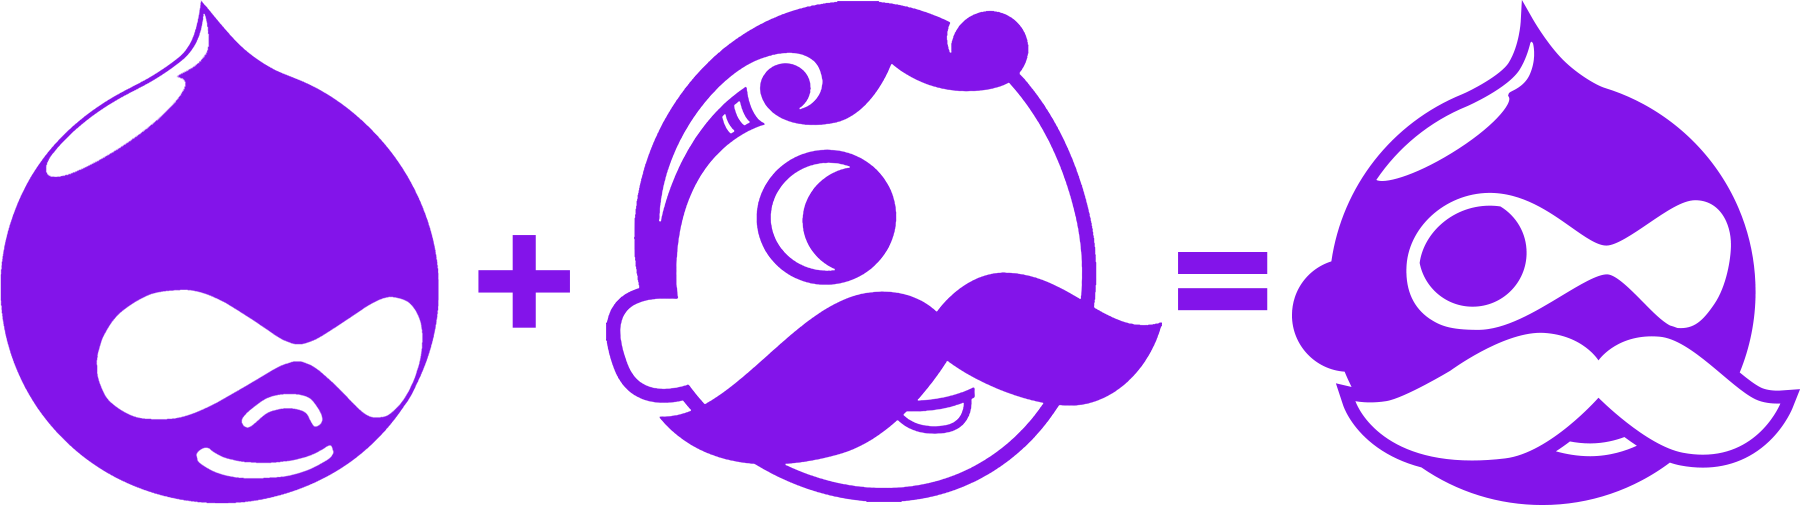 The Drupal and National Bohemian logos combining into the Drupal Boh logo